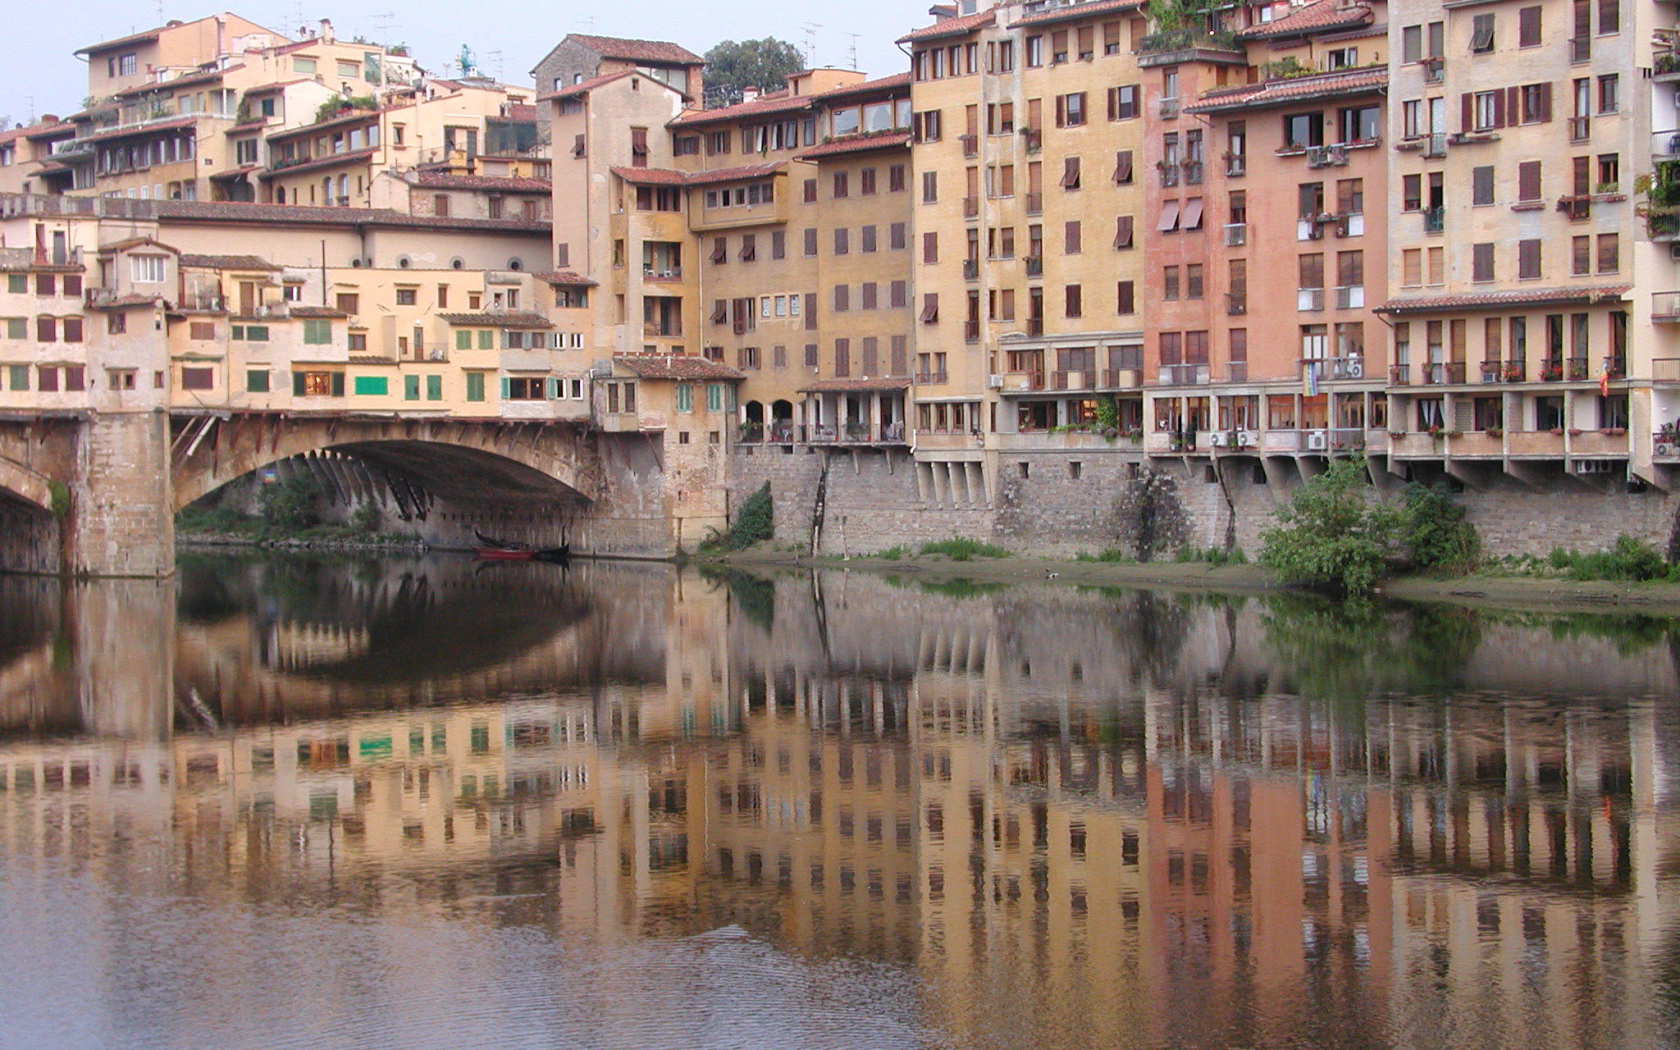 Reflection of buildings in water in Florence, Italy